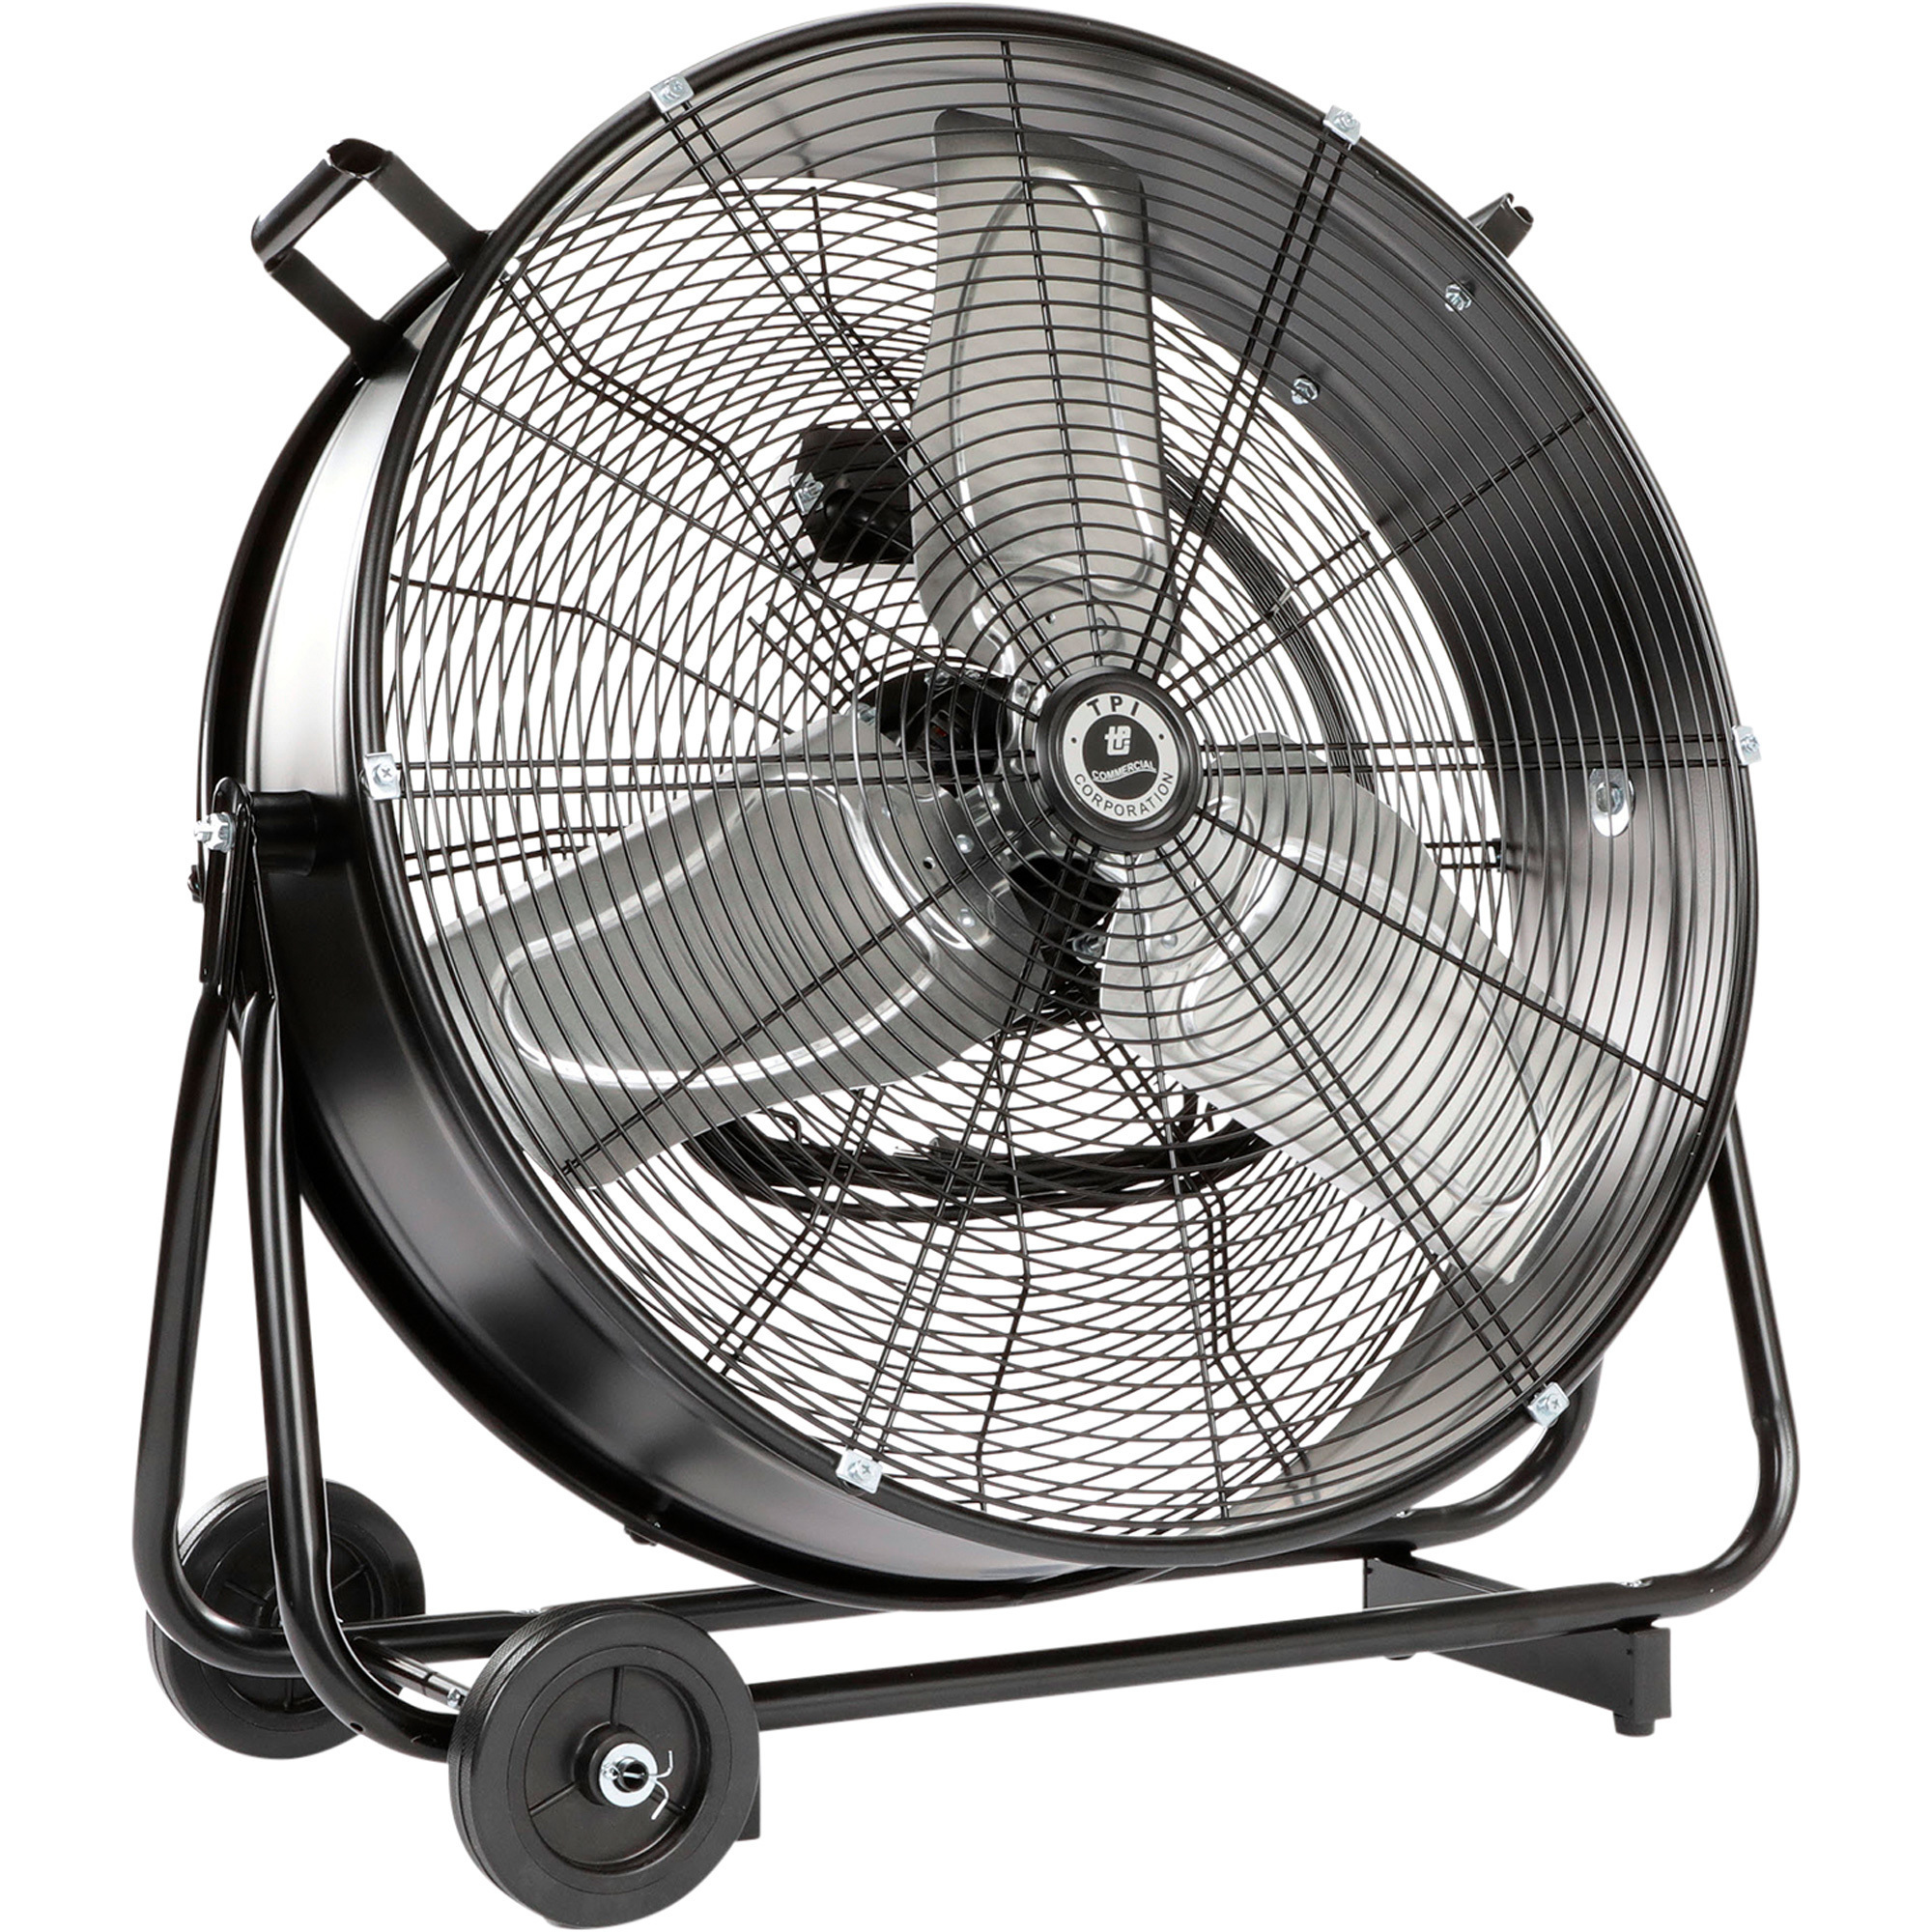 TPI Commercial Drum Fan with Swivel Base, 24Inch, 2 Speeds, 5400 CFM, 1/3 HP, 120 Volt, Model CPBS24DHV